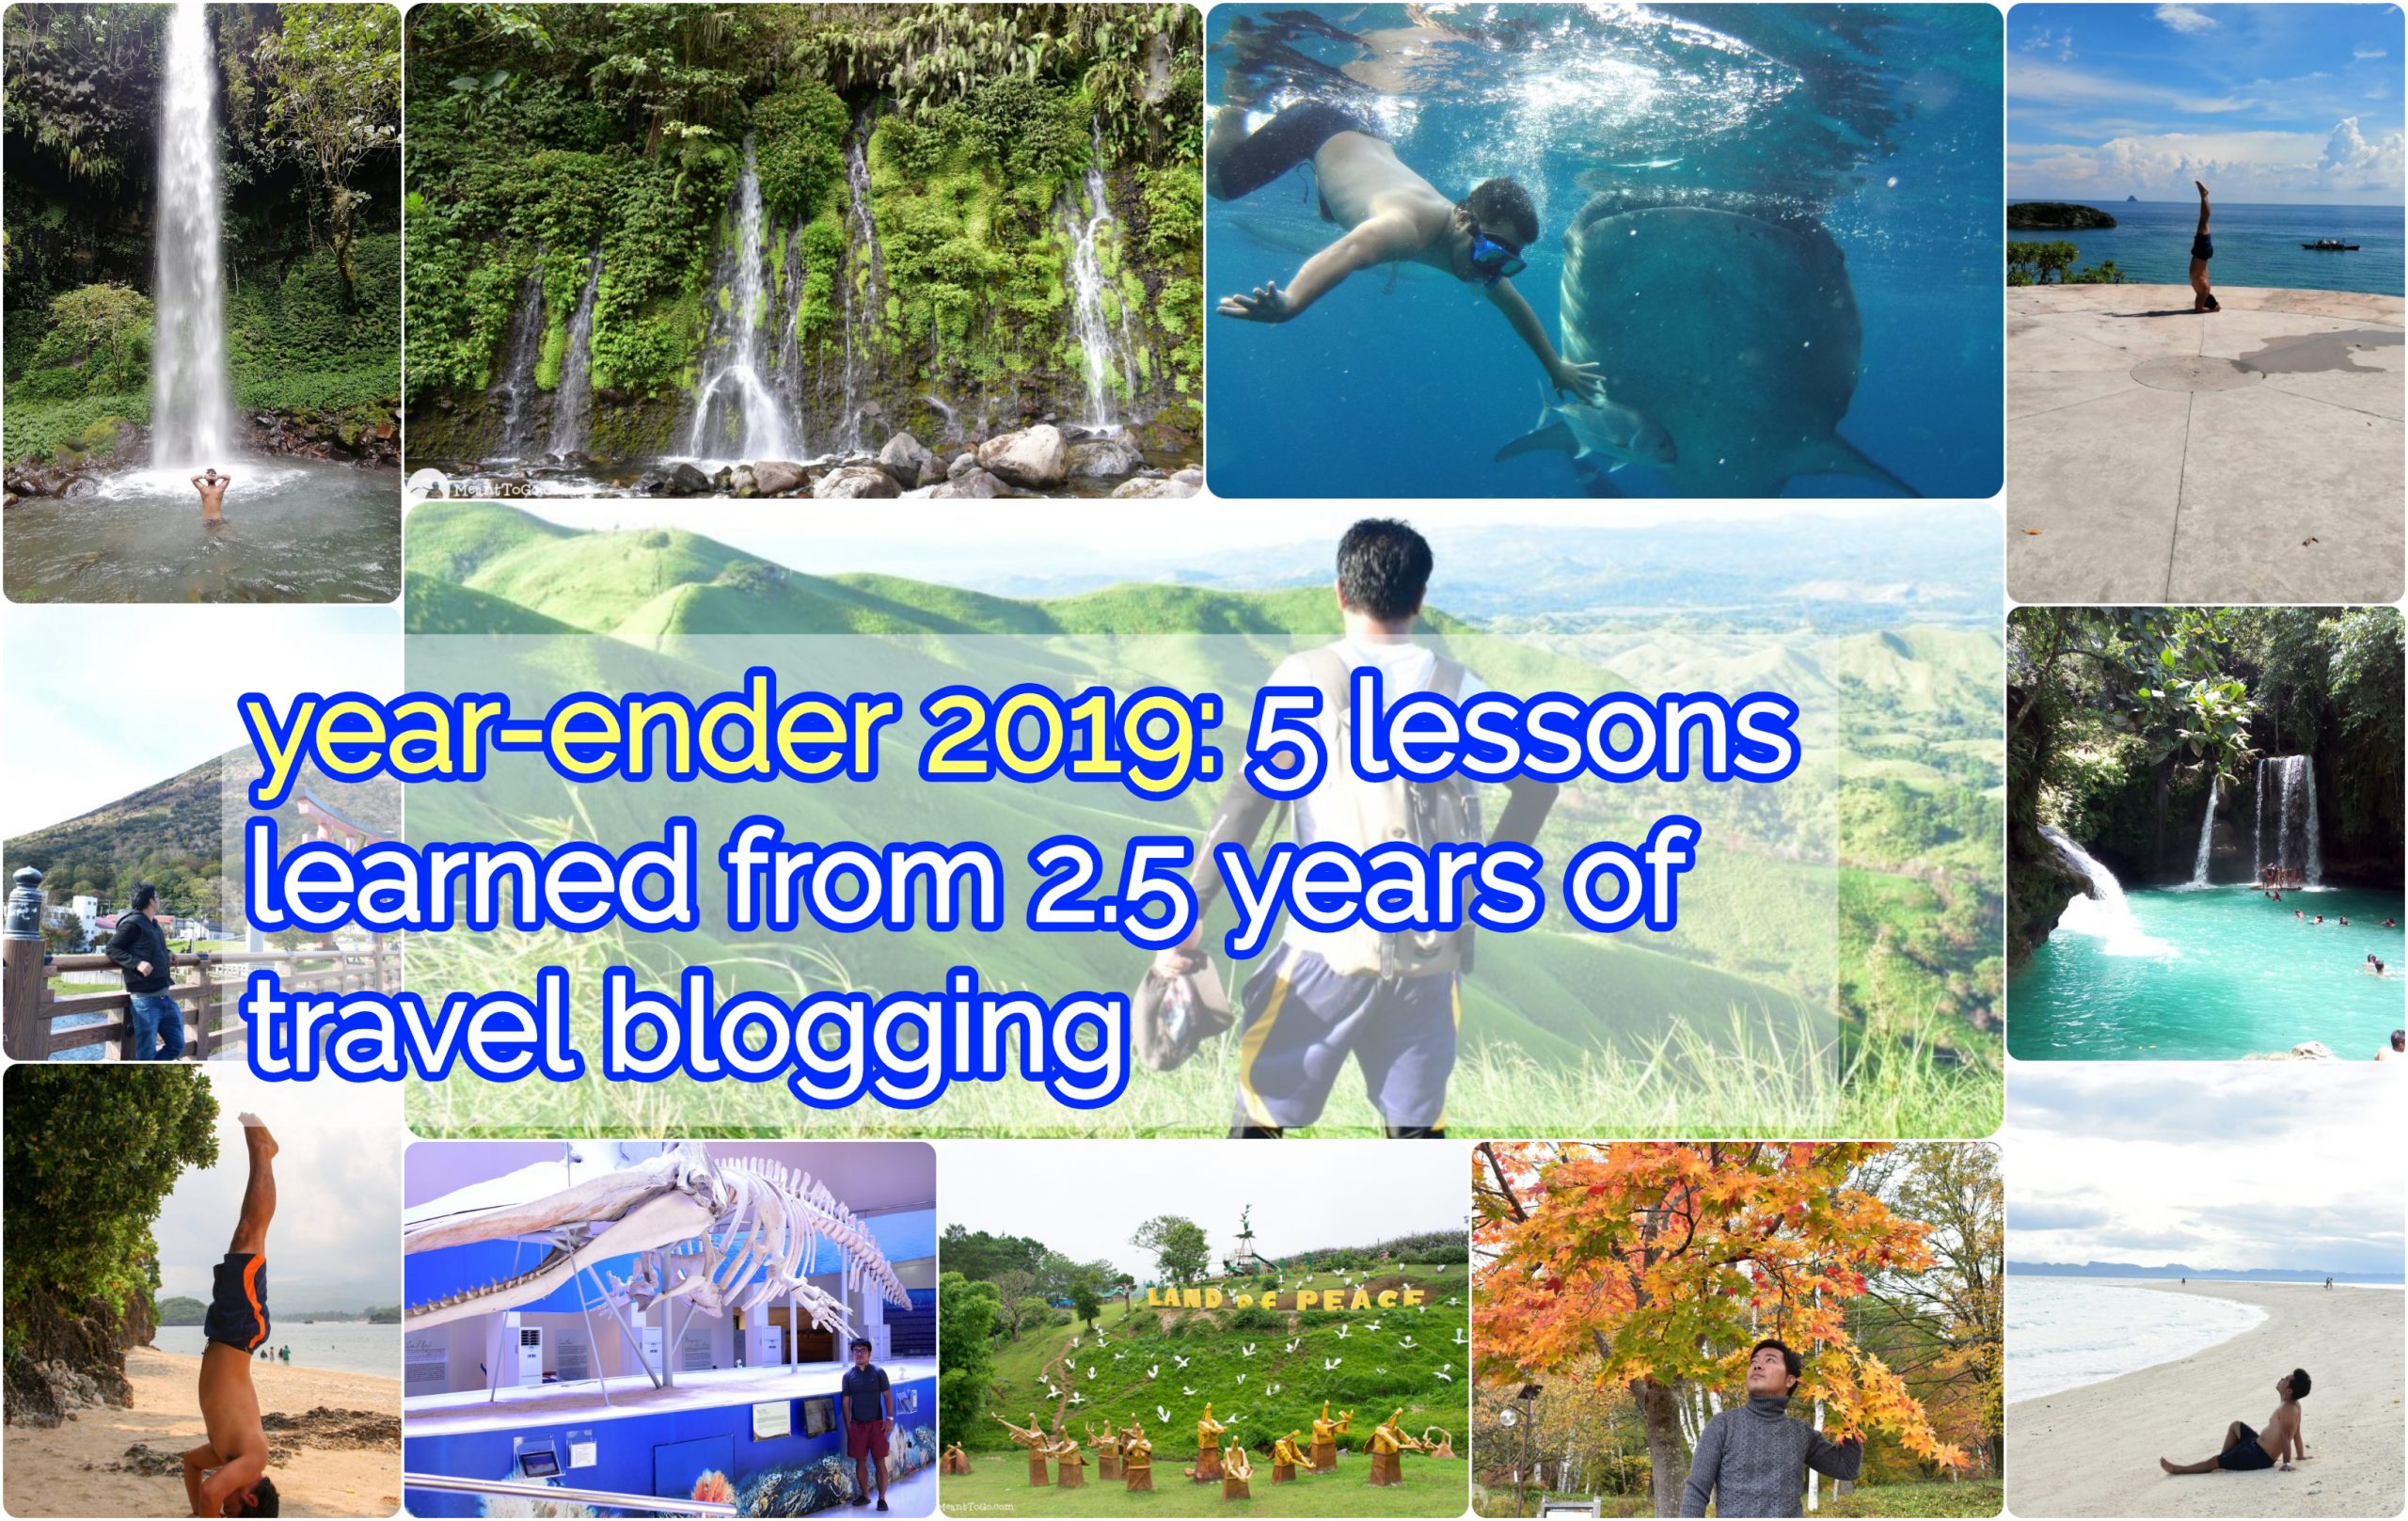 2.5 YEARS OF TRAVEL BLOGGING: THE UPS AND DOWNS (AND THE 5 VALUABLE LESSONS LEARNED ALONG THE WAY)